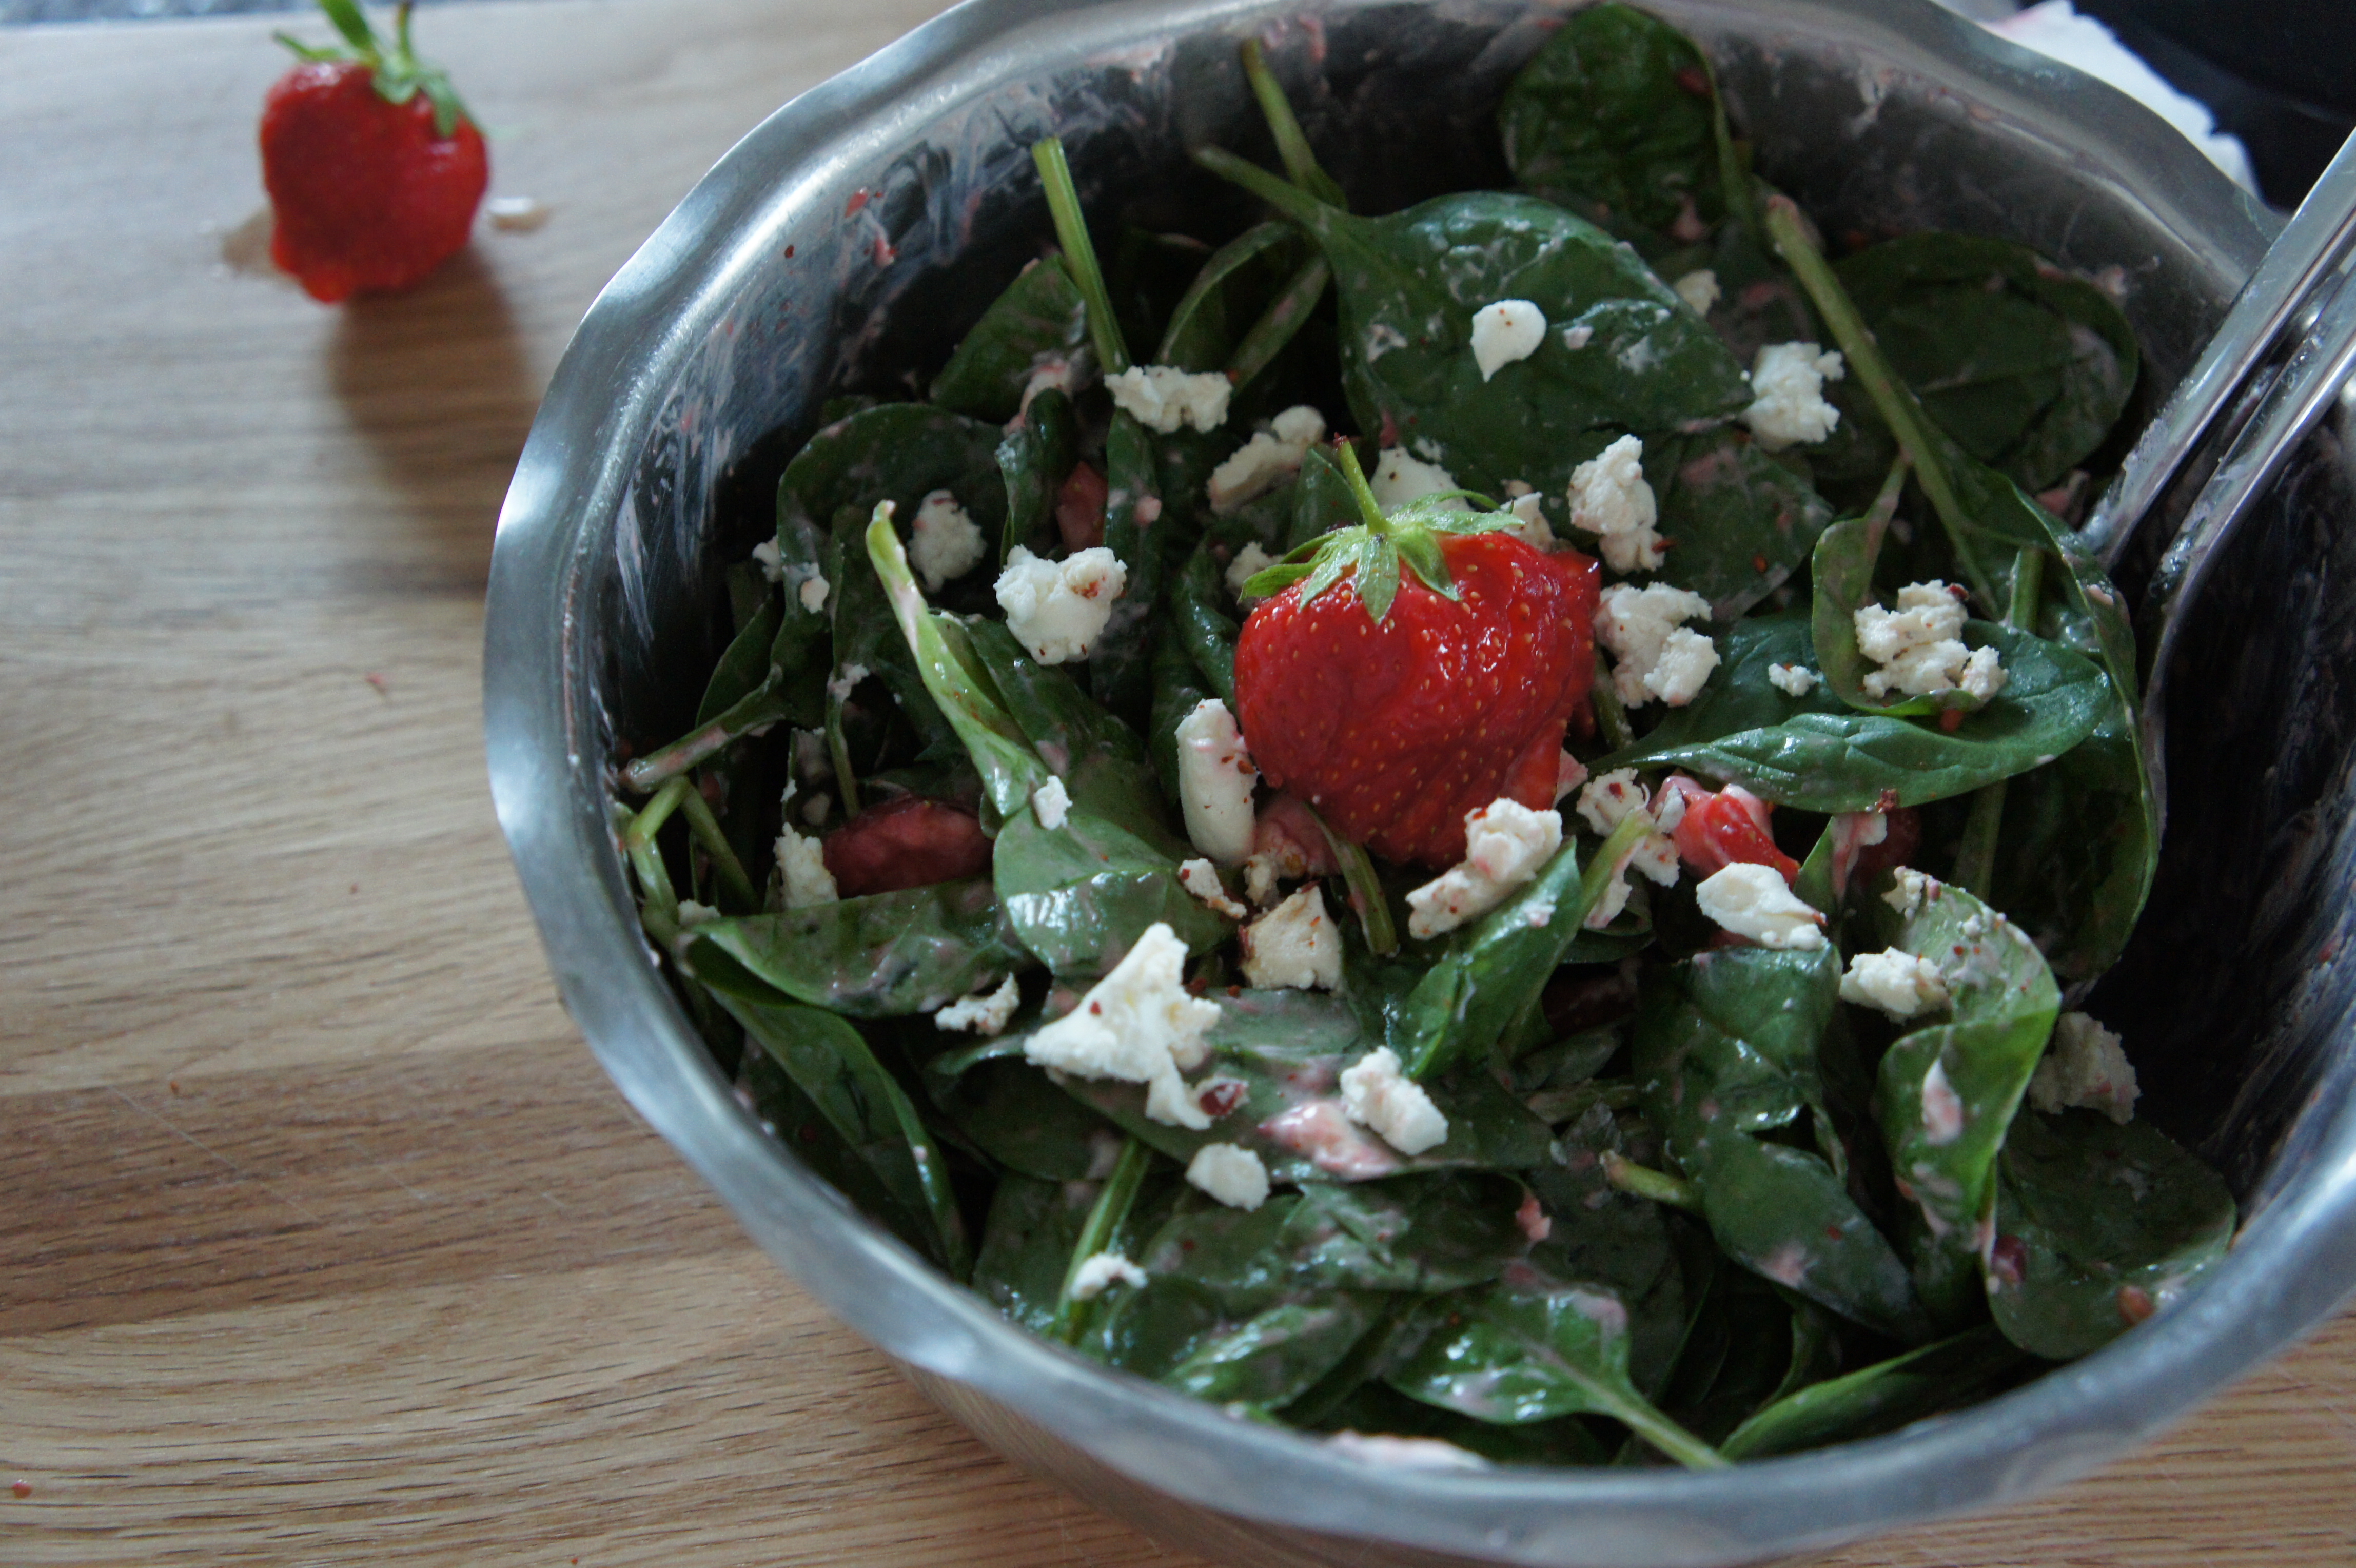 Strawberry Spinach Spicy Goat's Cheese Salad